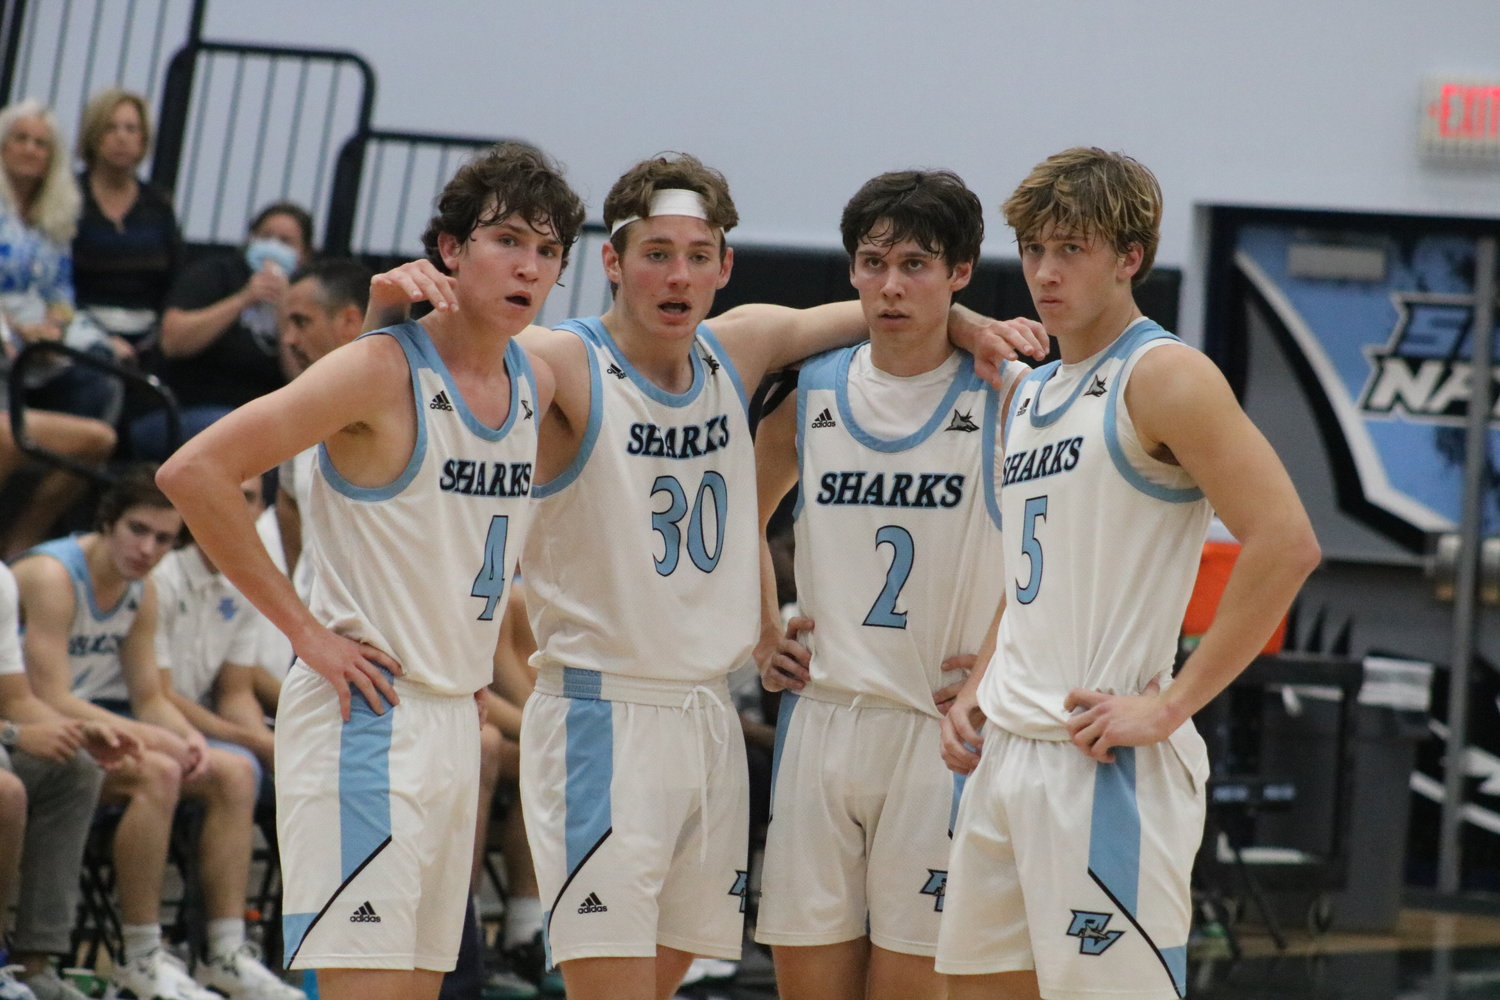 The Sharks will play for the school’s first boys basketball state title Saturday at 5:30 p.m. against Stuart Martin County in Lakeland.